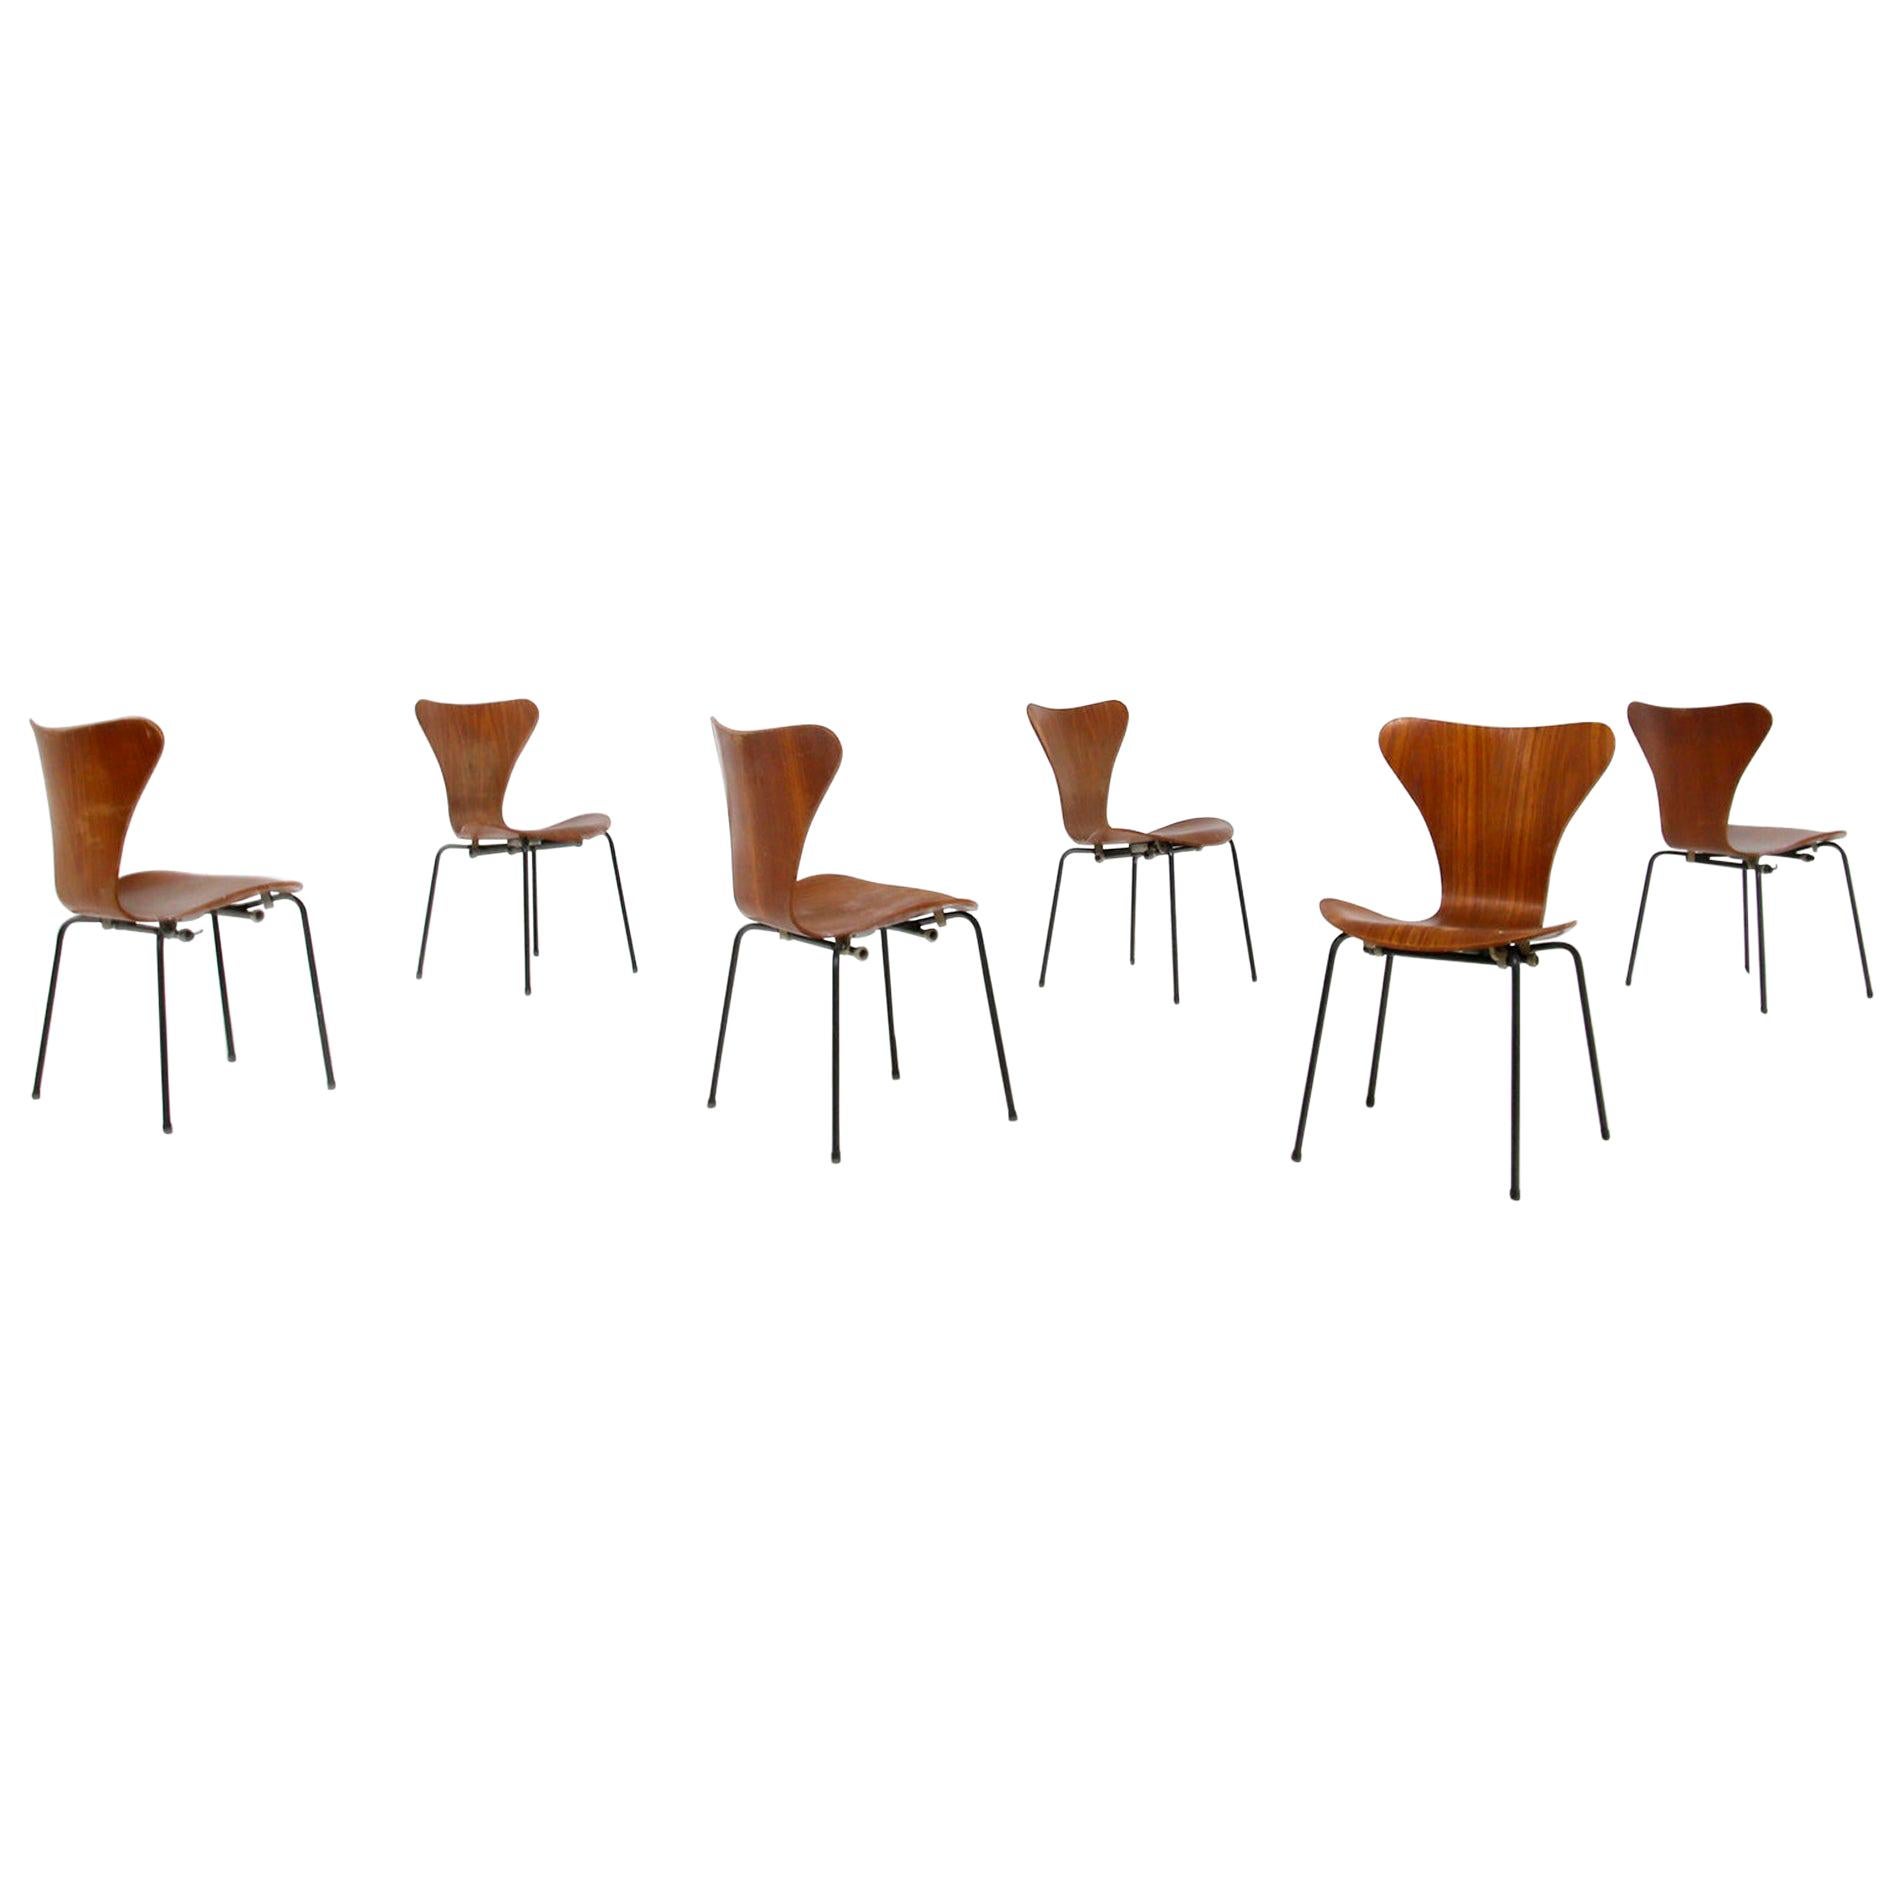 Set of Six Chairs by Arne Jacobsen M. Butterfly for the Brazilian Airline, 1950s